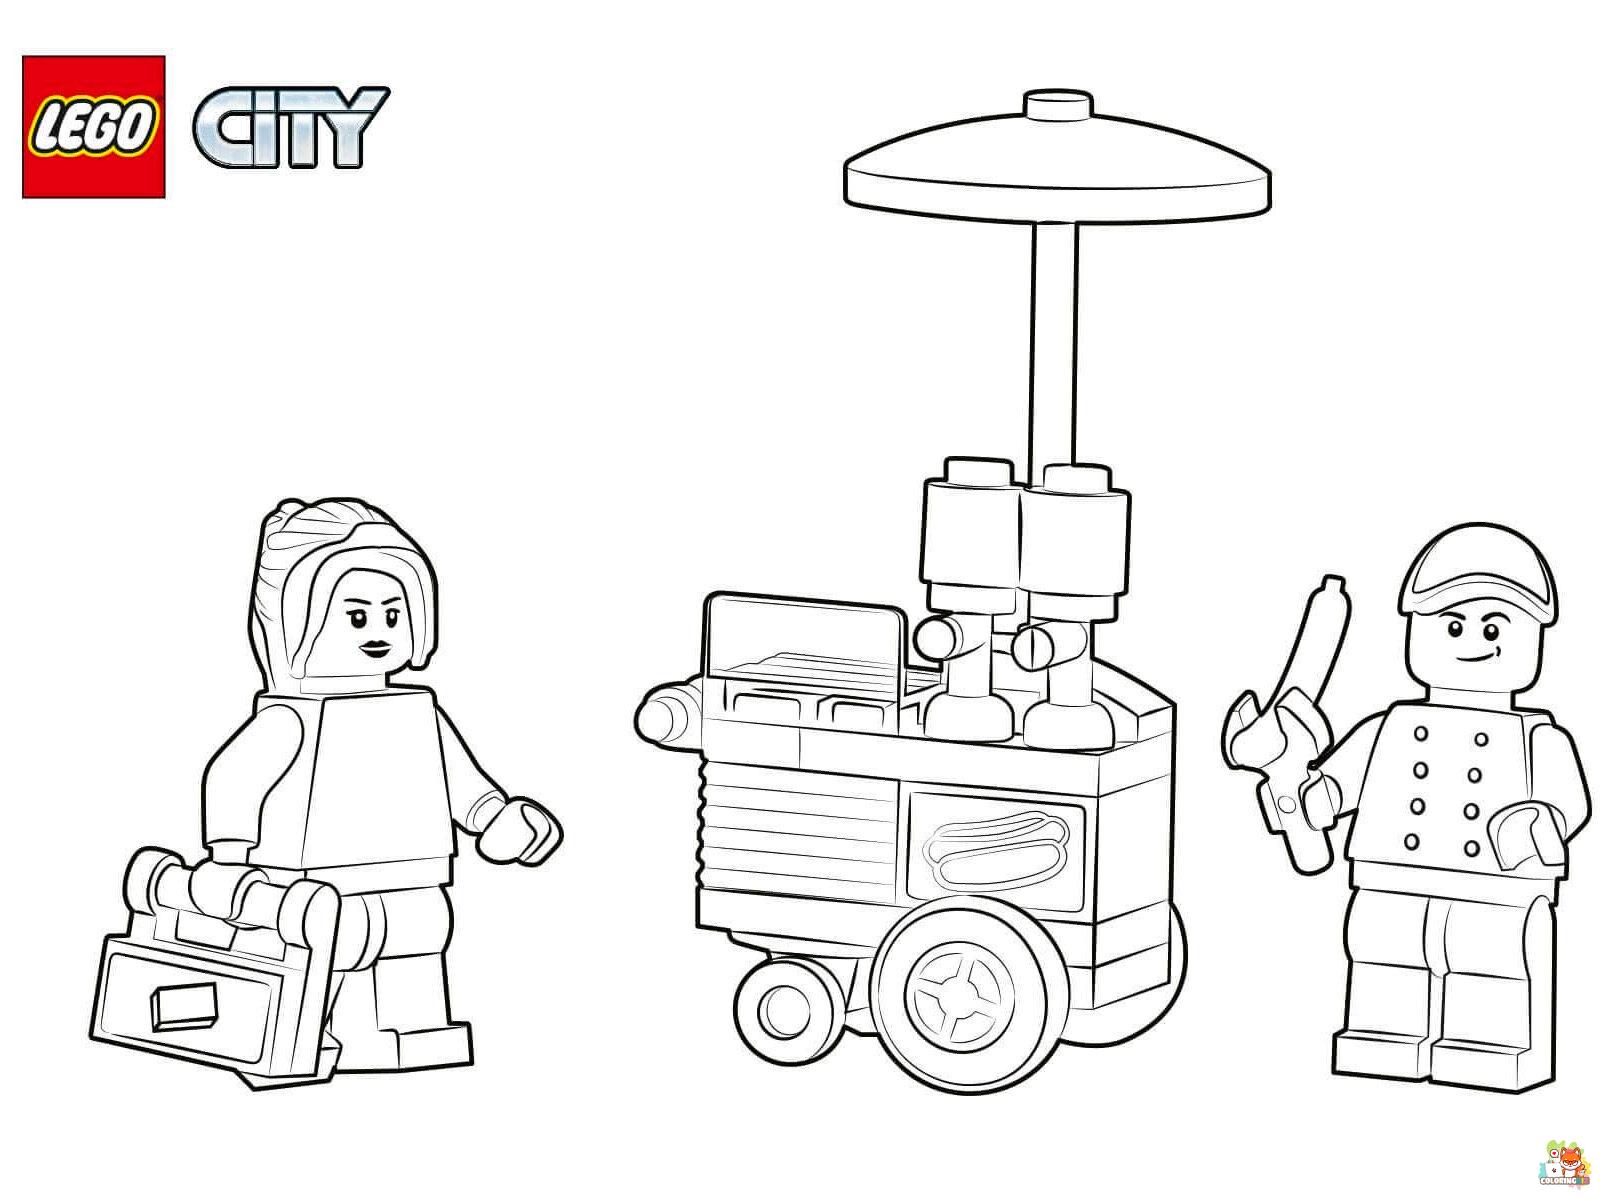 Lego City Coloring Pages 18 1